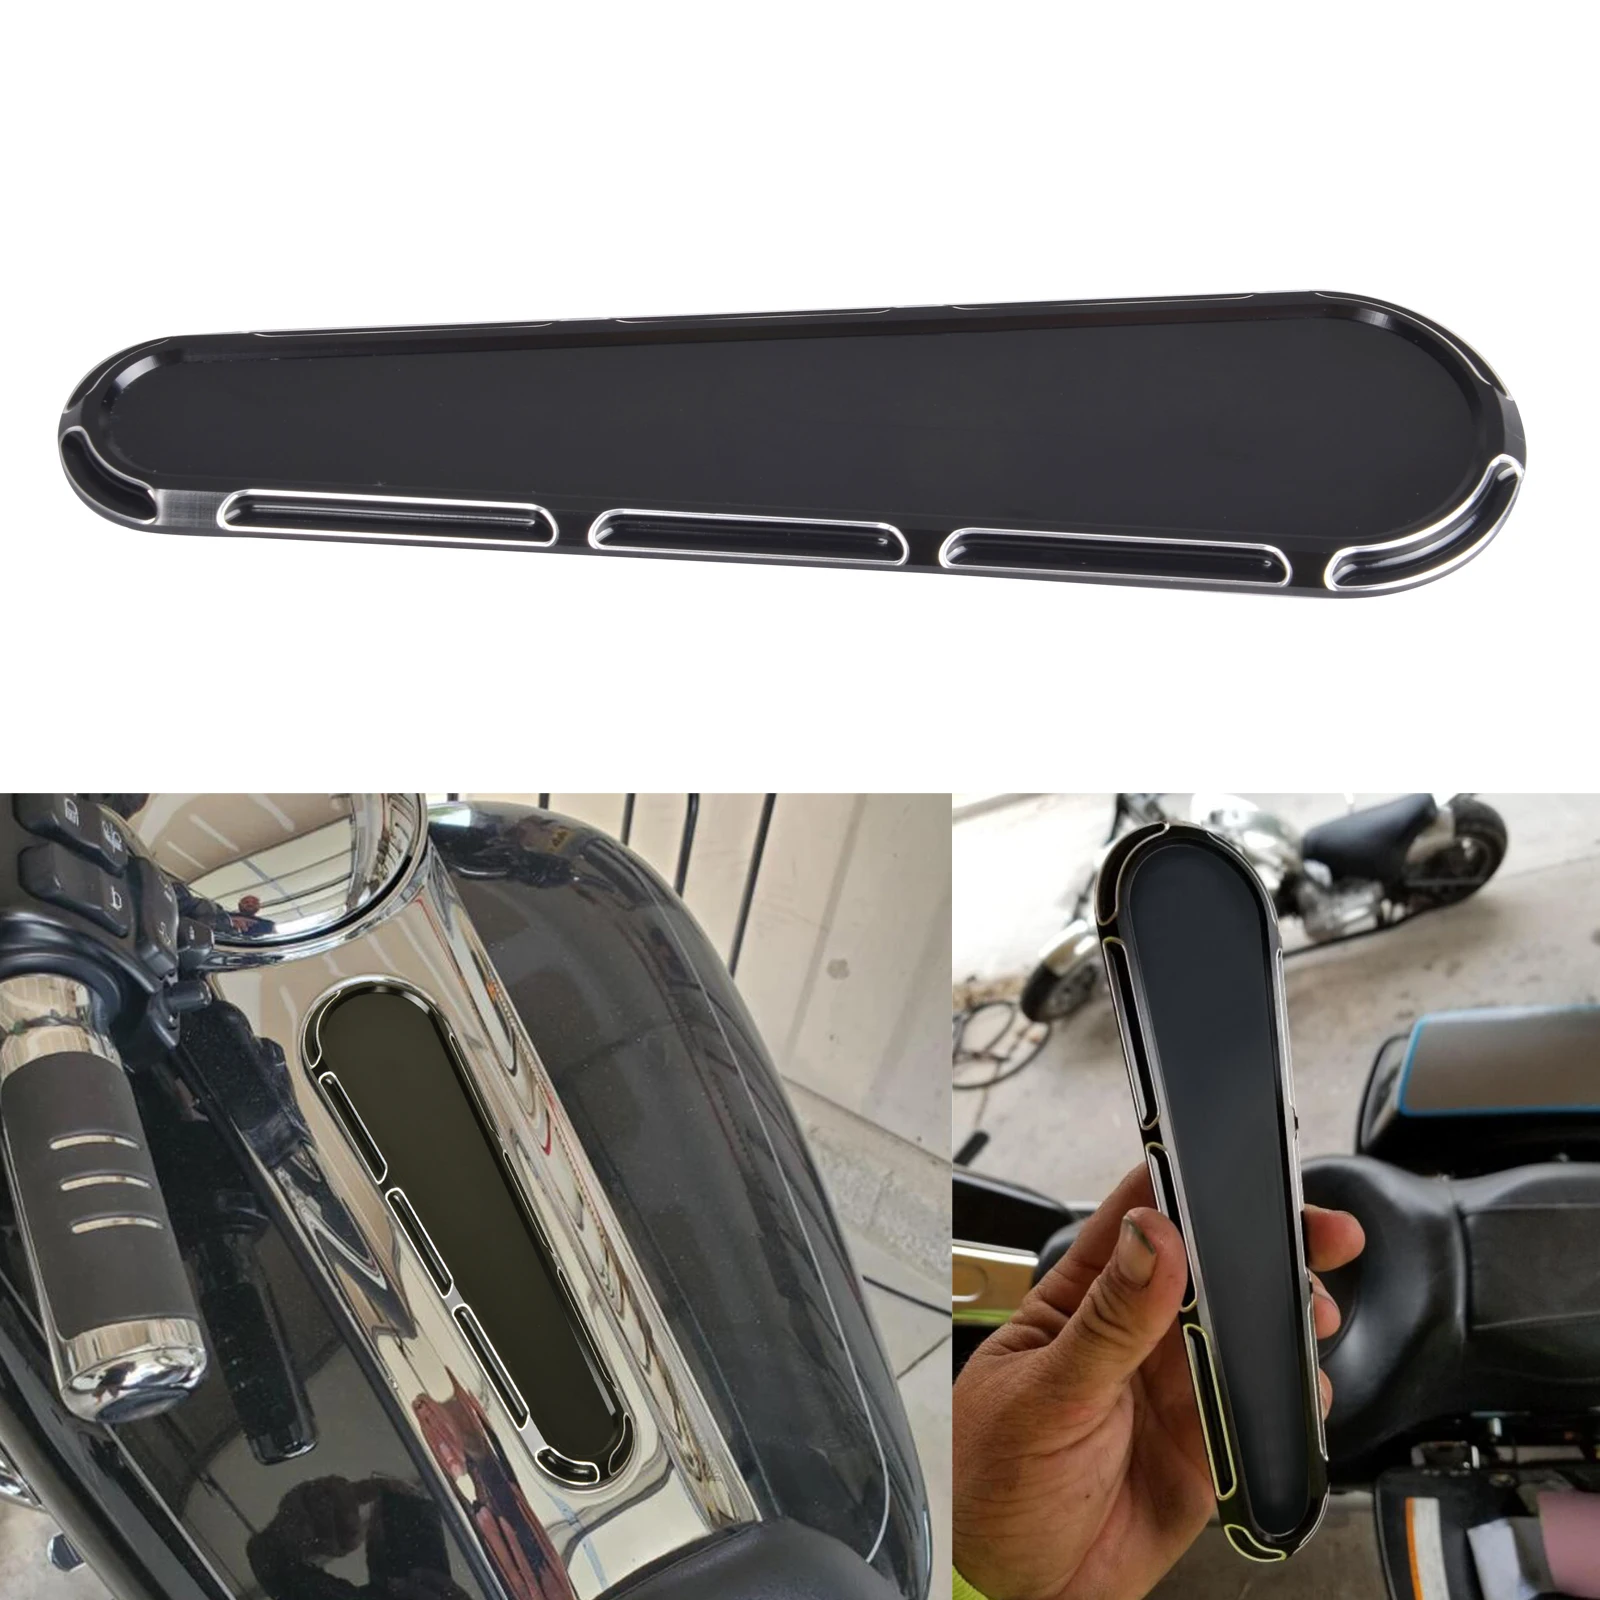 Motorcycle Fuel Tank Cover Cut Dash Insert Cover Cap For Harley Touring Road Street Glide Road Glide FLTRX FLHX 2008-2018